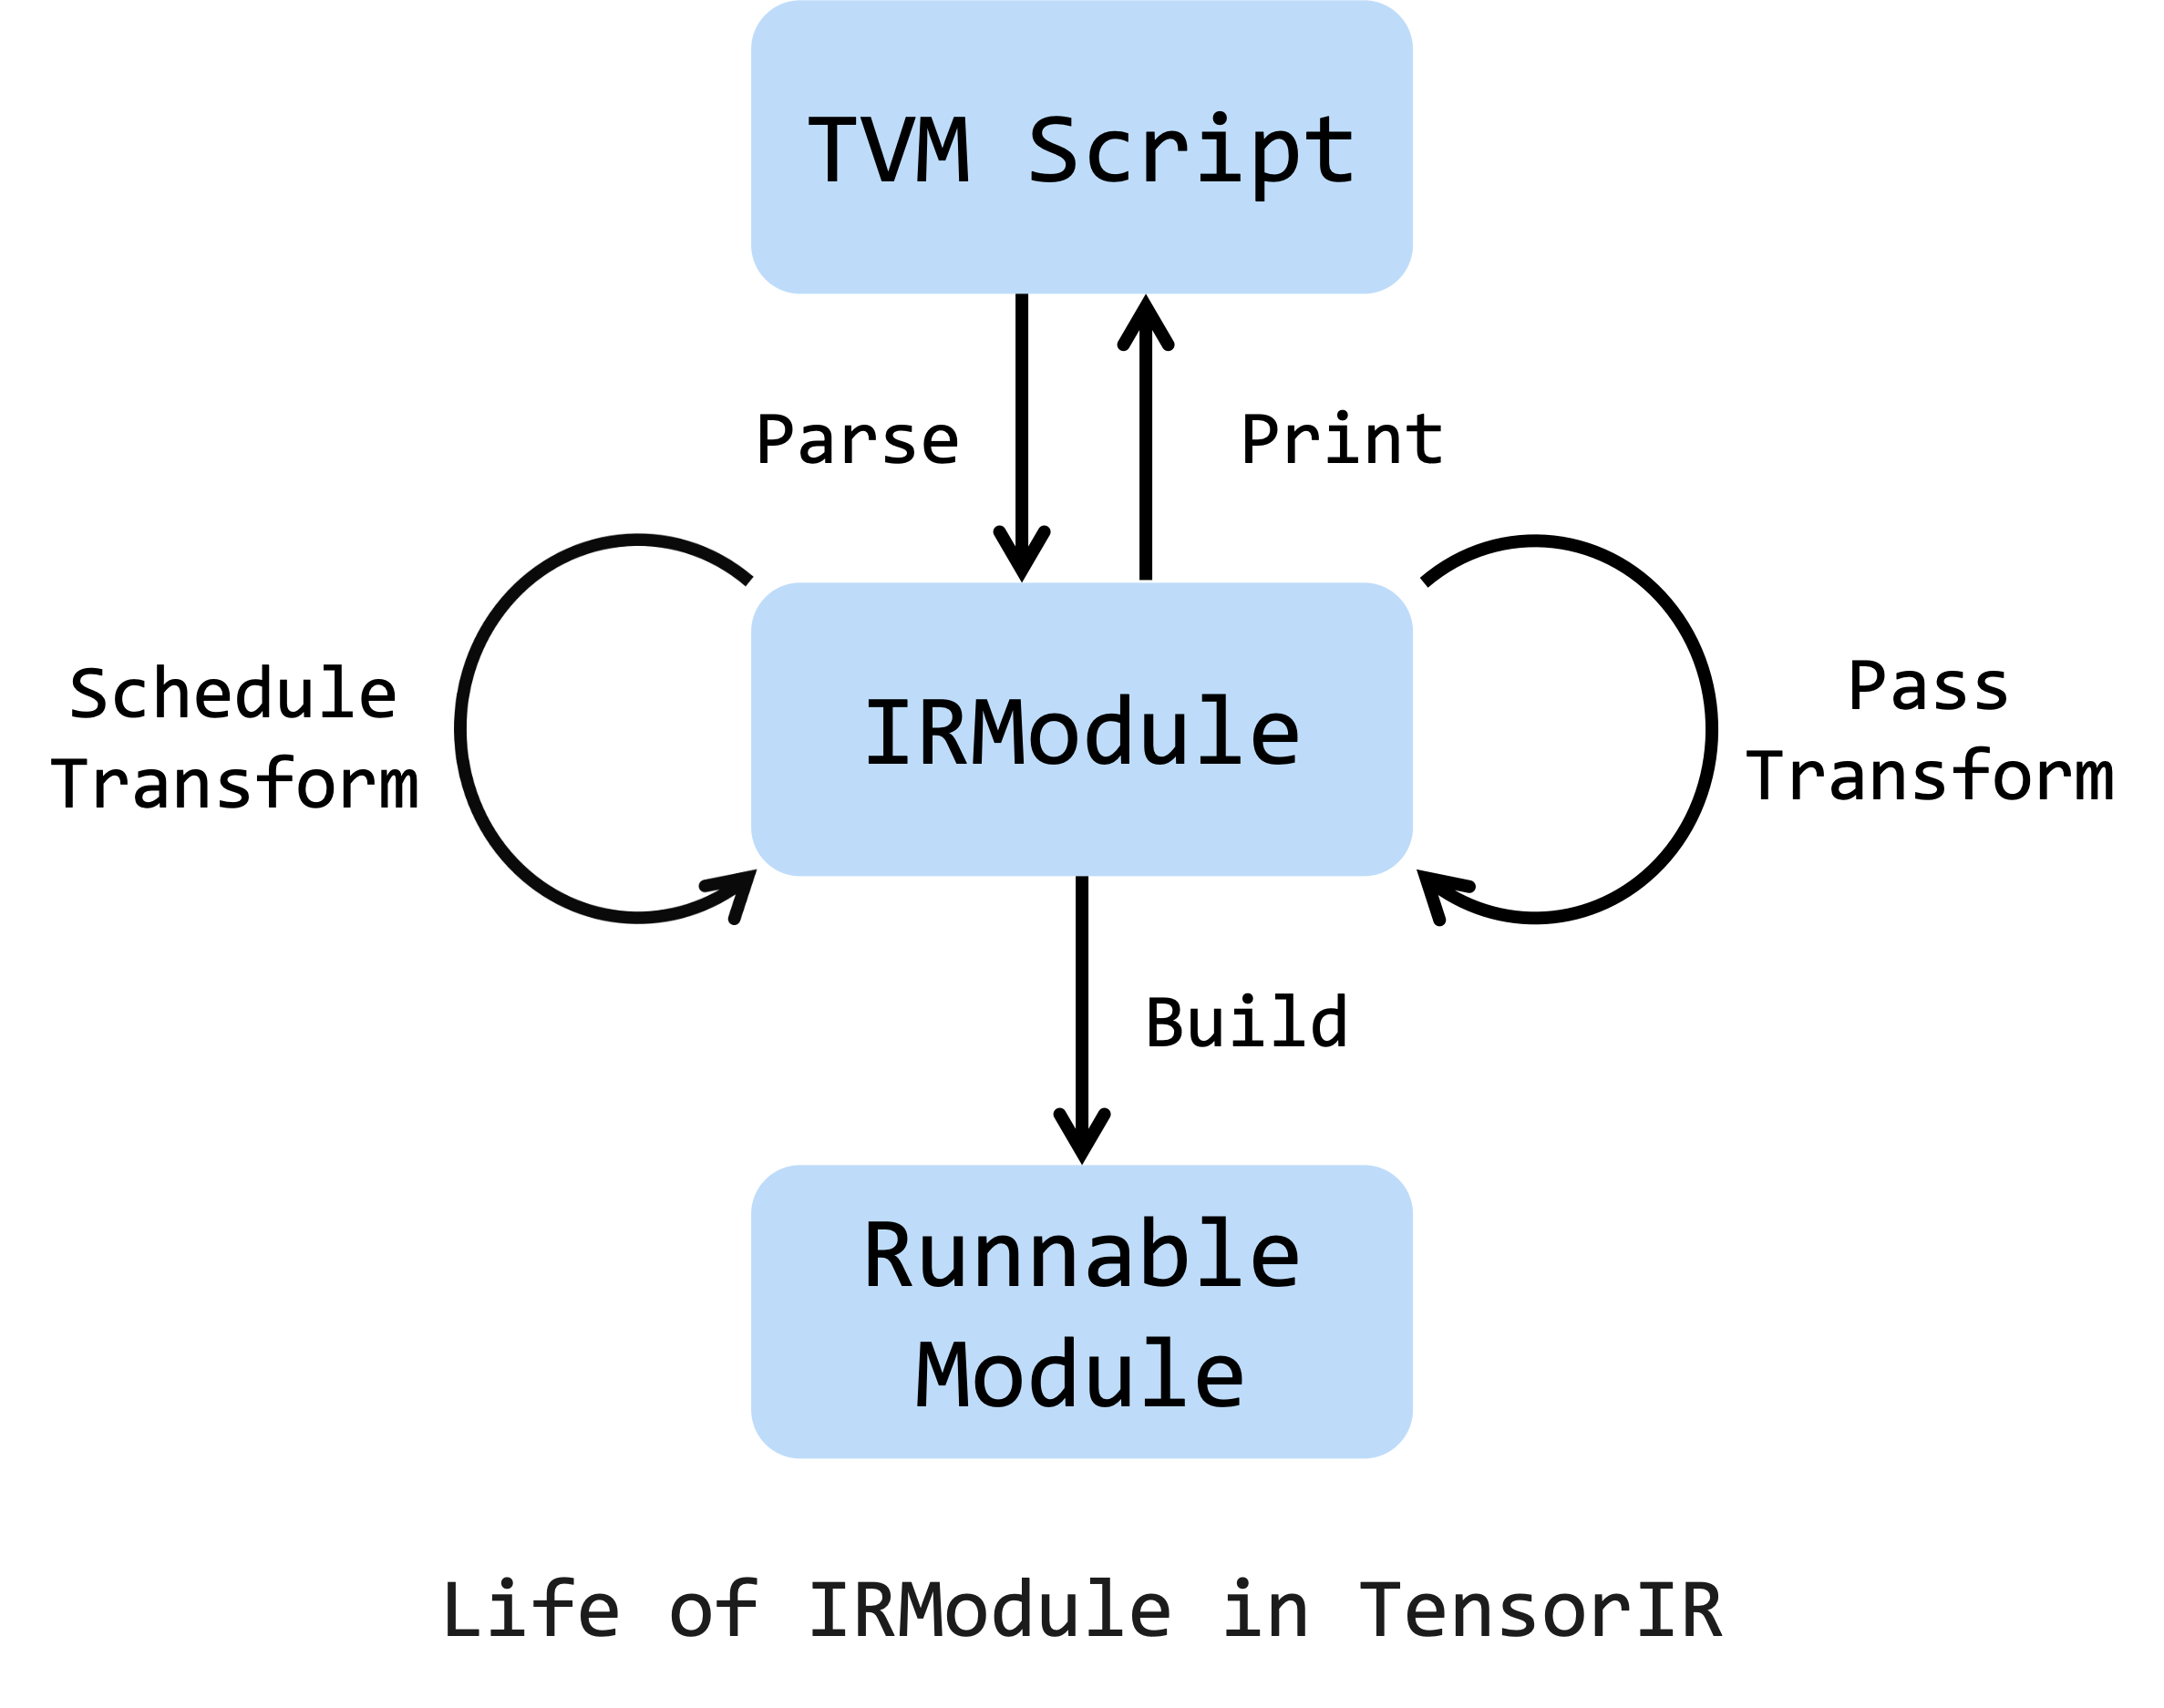 https://raw.githubusercontent.com/tlc-pack/web-data/main/images/design/tvm_life_of_irmodule.png